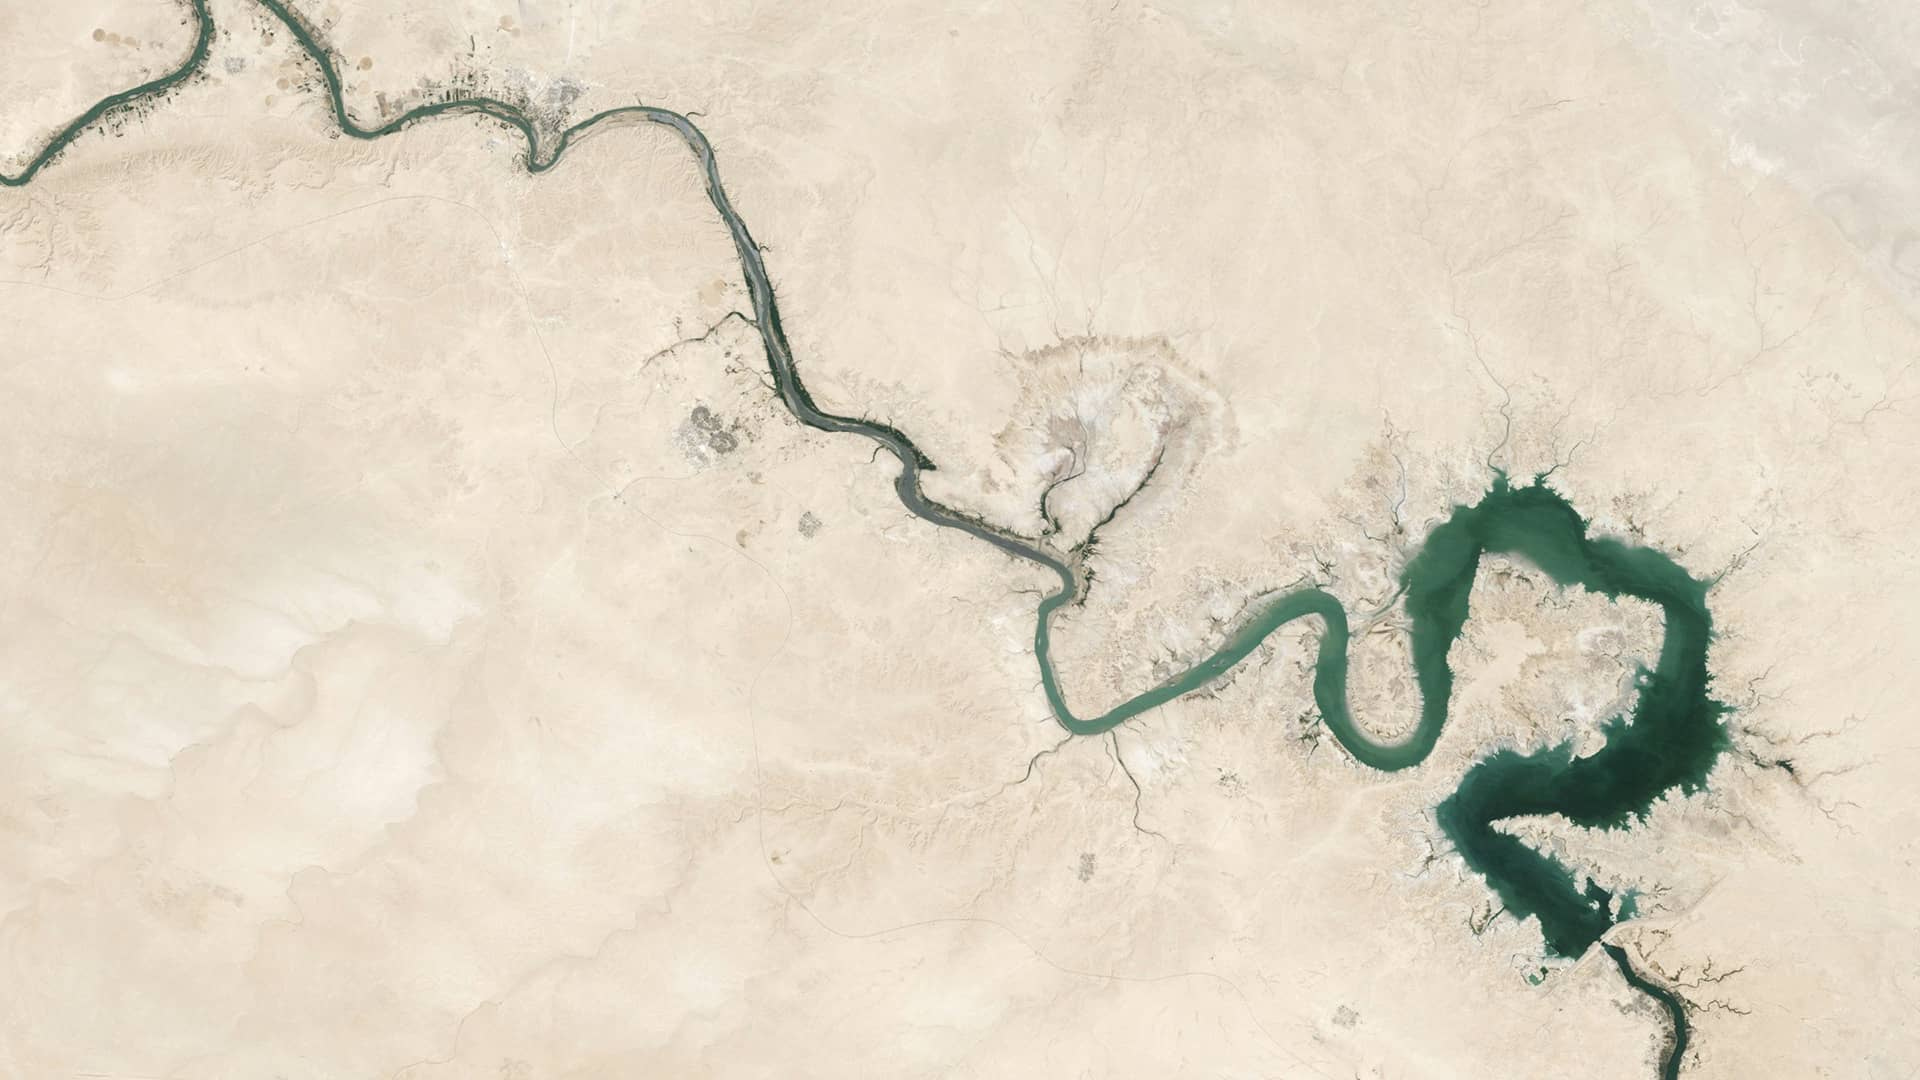 A satellite image of a river.